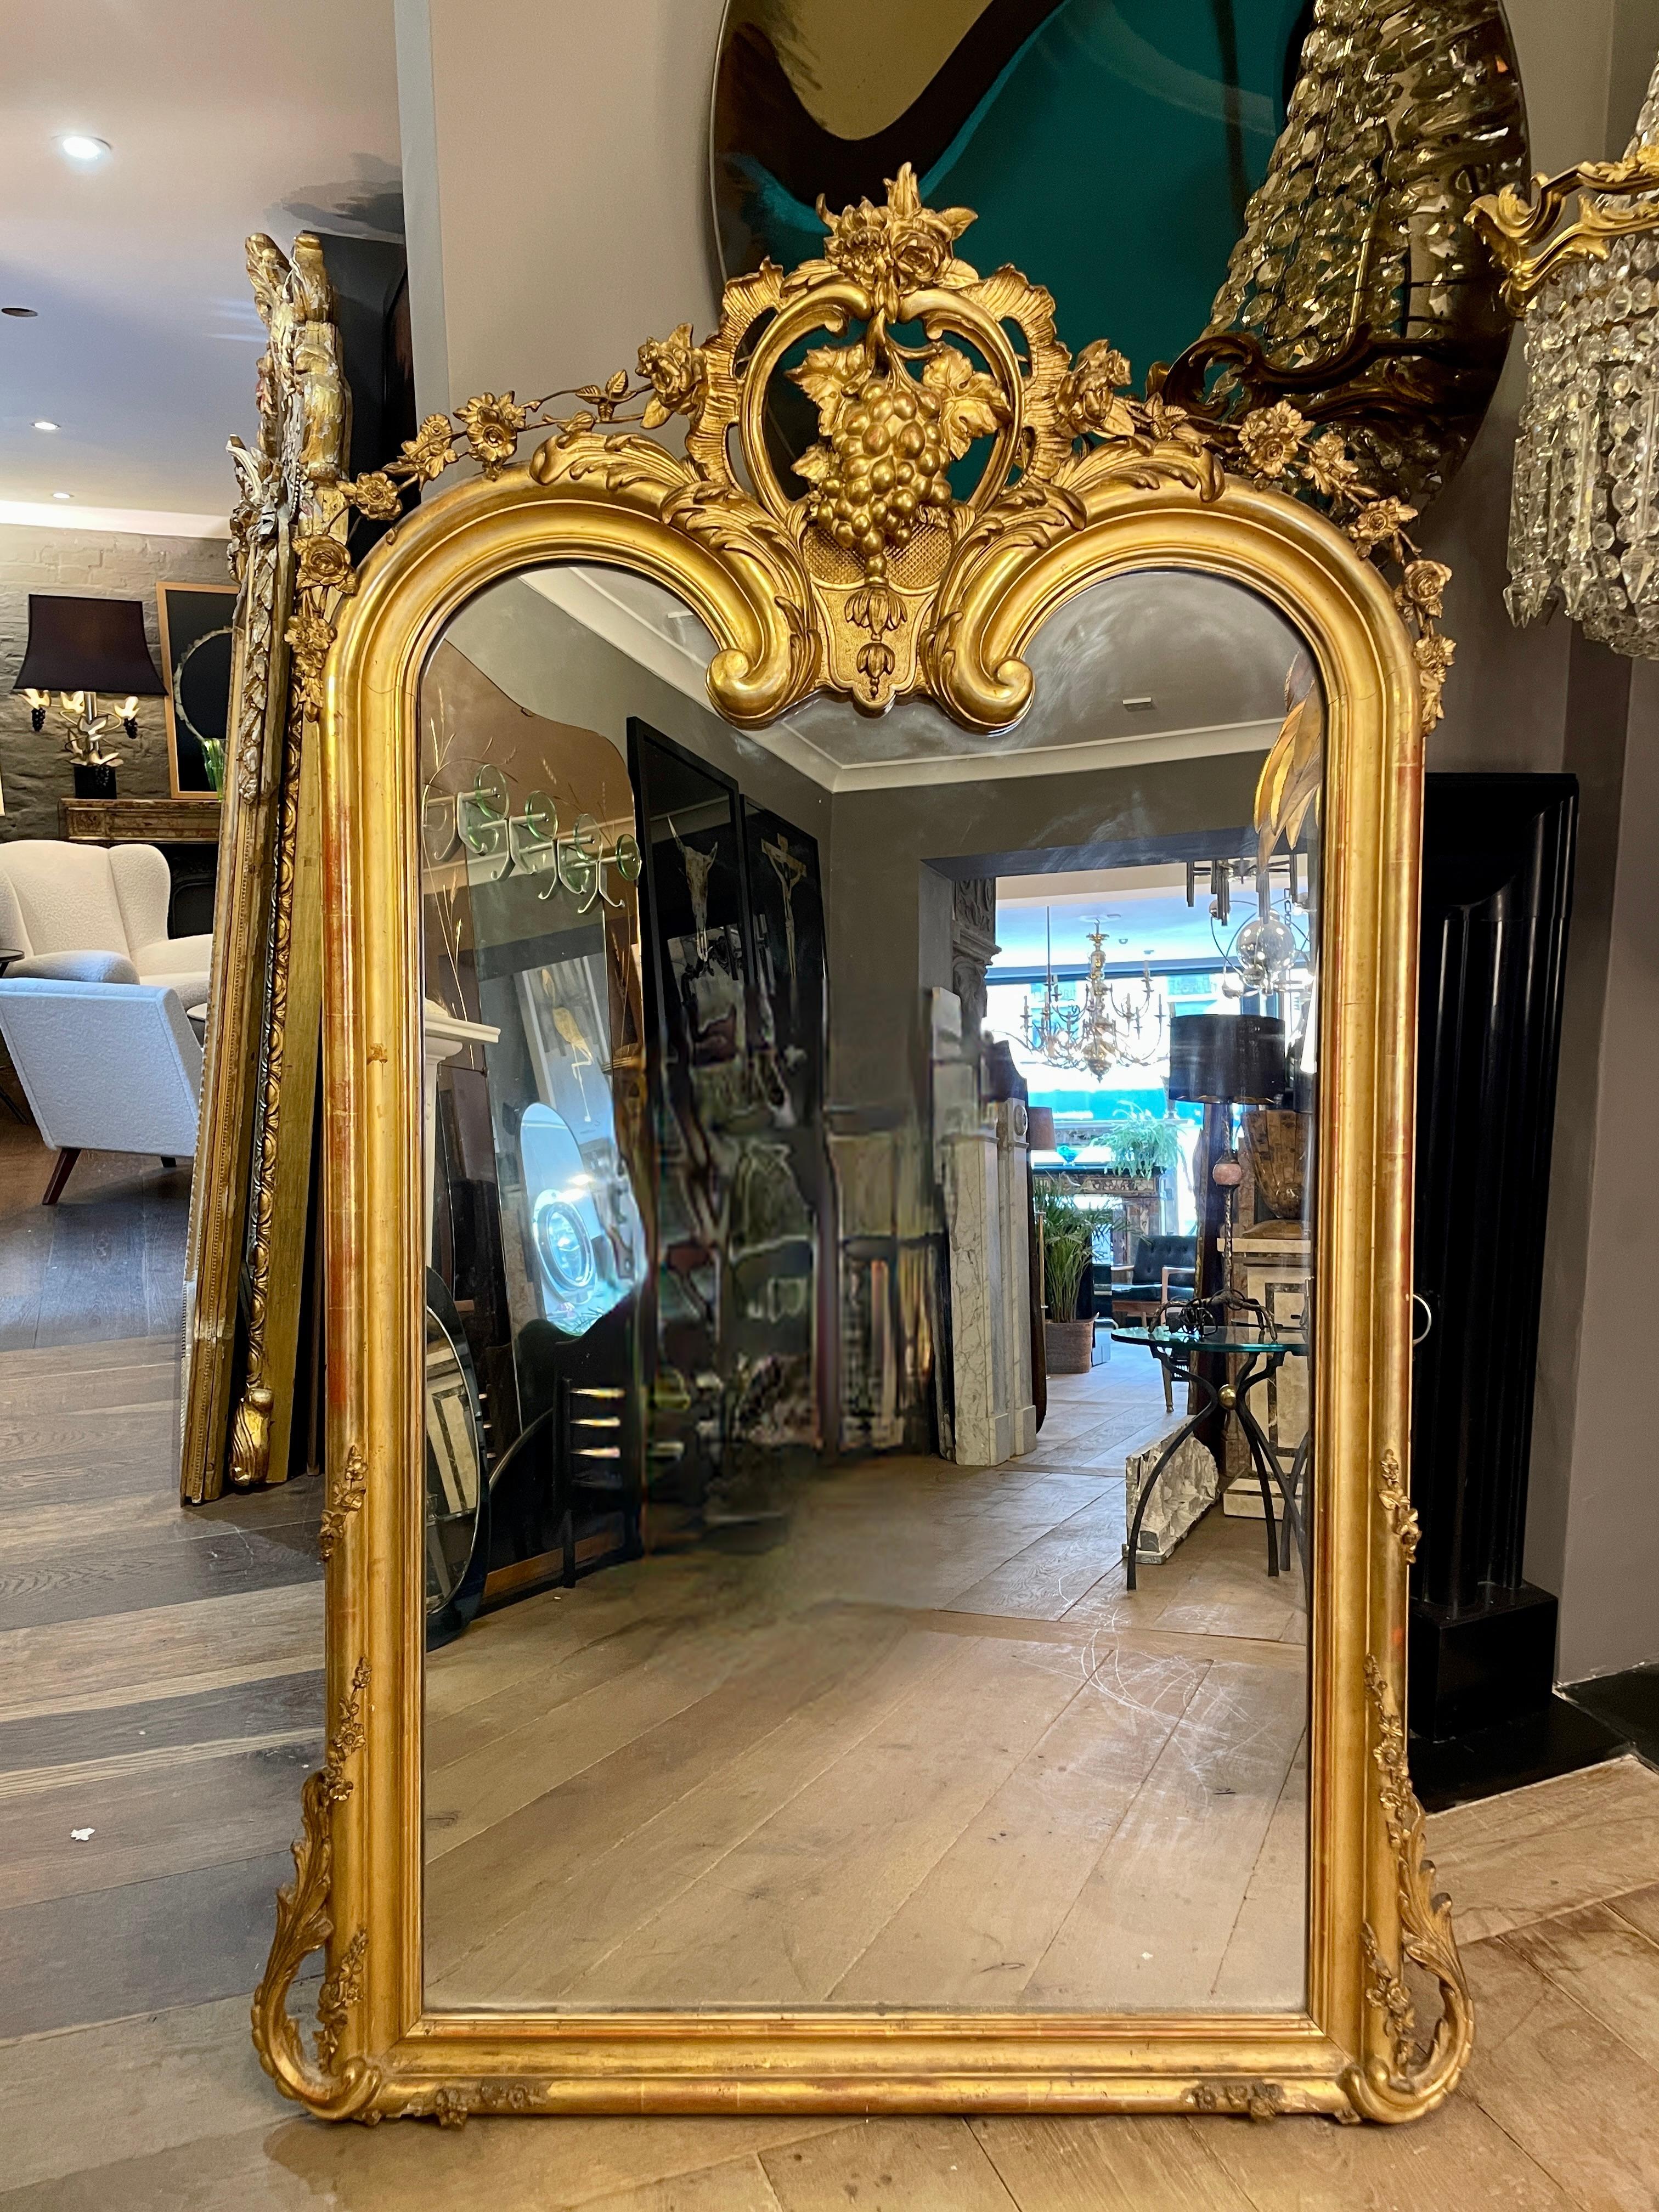 A very good quality early 19th century French gilt mirror in the Louis XV manner. Unusually shaped scrolled top to mirror plate under the elaborate large central cartouche of scrolled foliate with a large grapevine centre. Cascading from each side